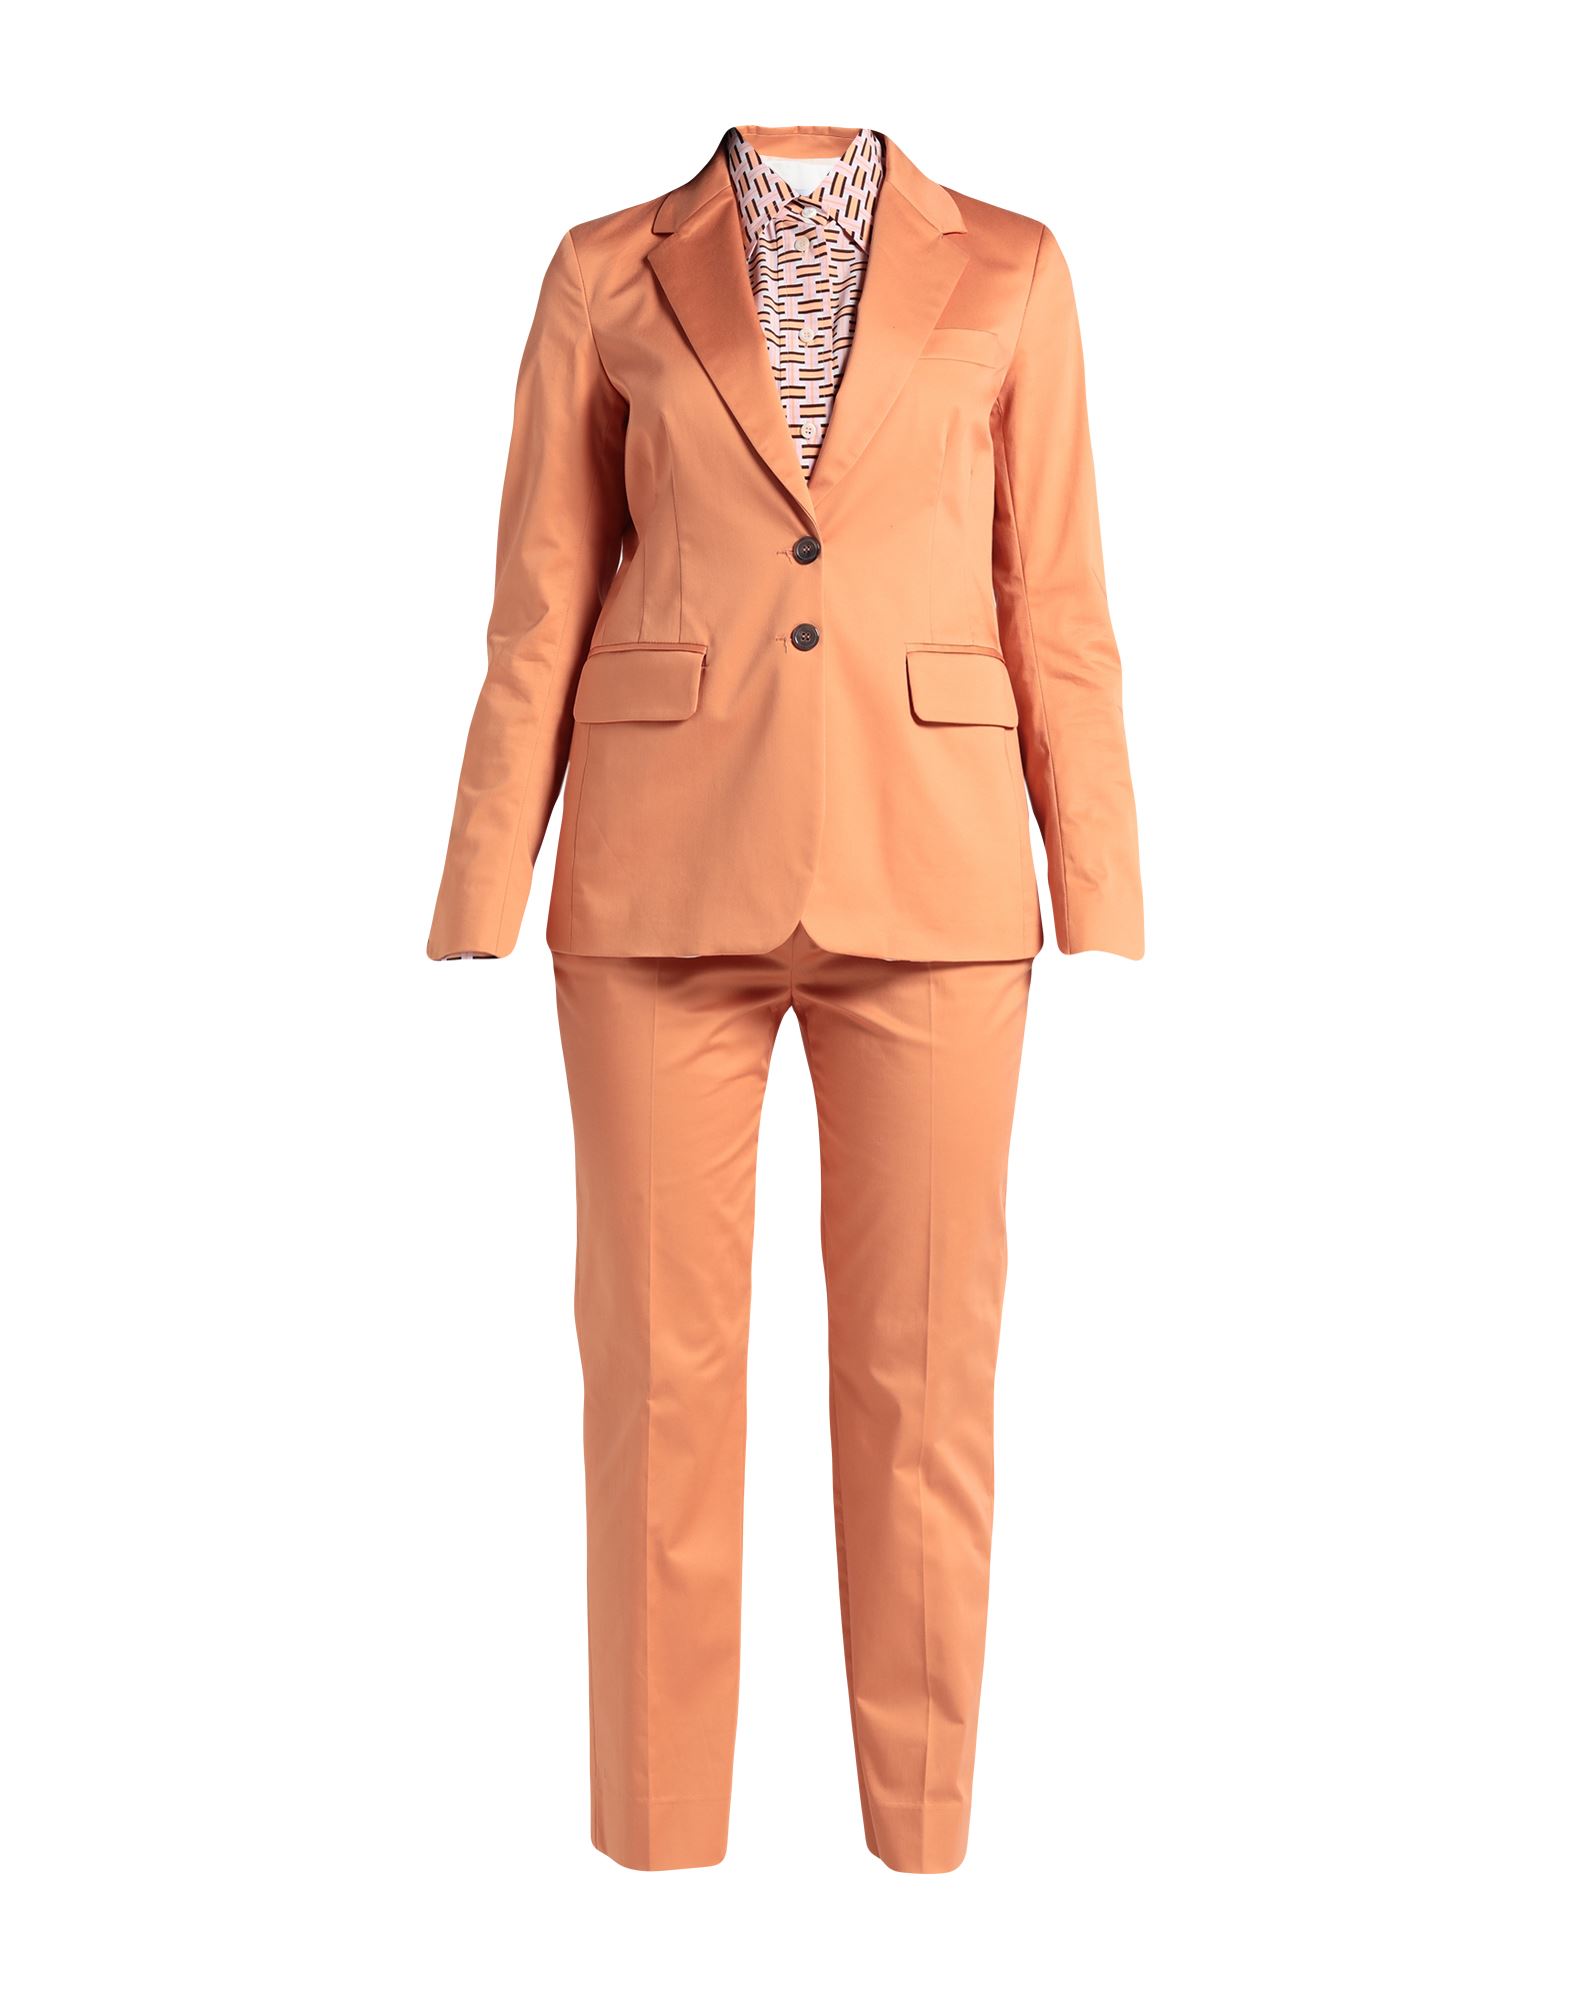 Mauro Grifoni Suits In Orange